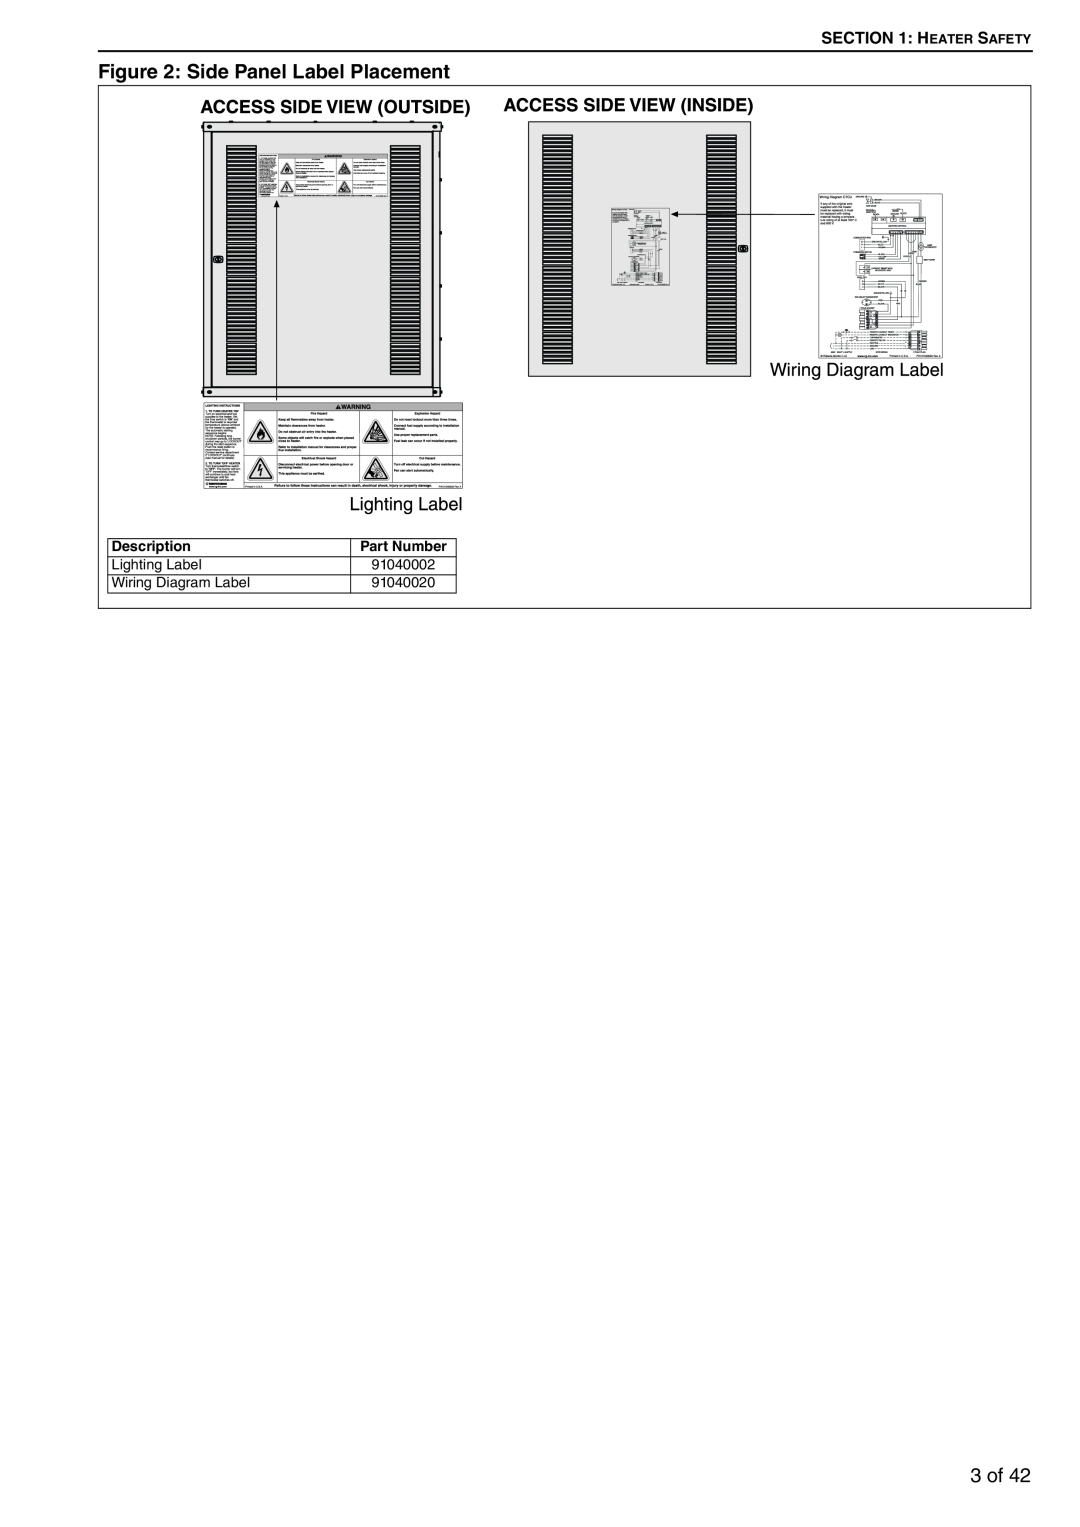 Roberts Gorden CTCU 22, CTCU 27, CTCU 15, CTCU 11, CTCU 7, CTCU 32 service manual Side Panel Label Placement, 3 of, Part Number 